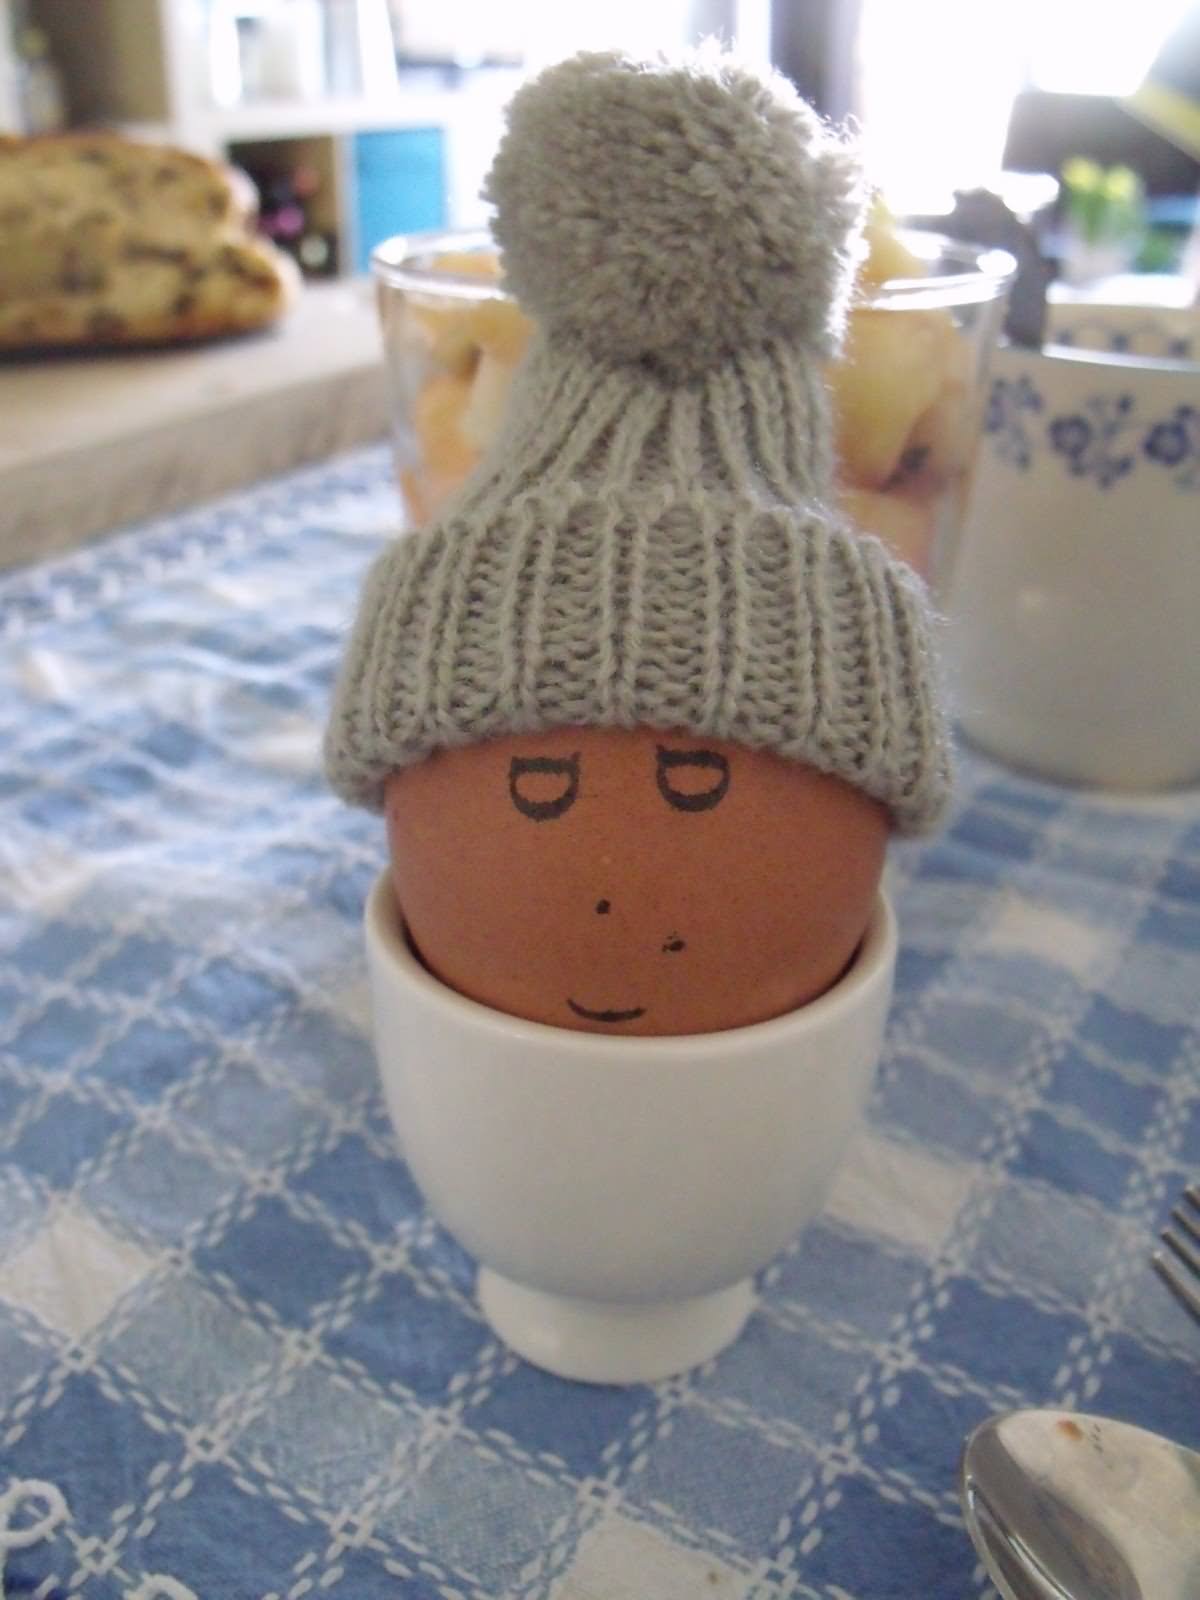 Wearing Woolen Cap Funny Egg Face Picture